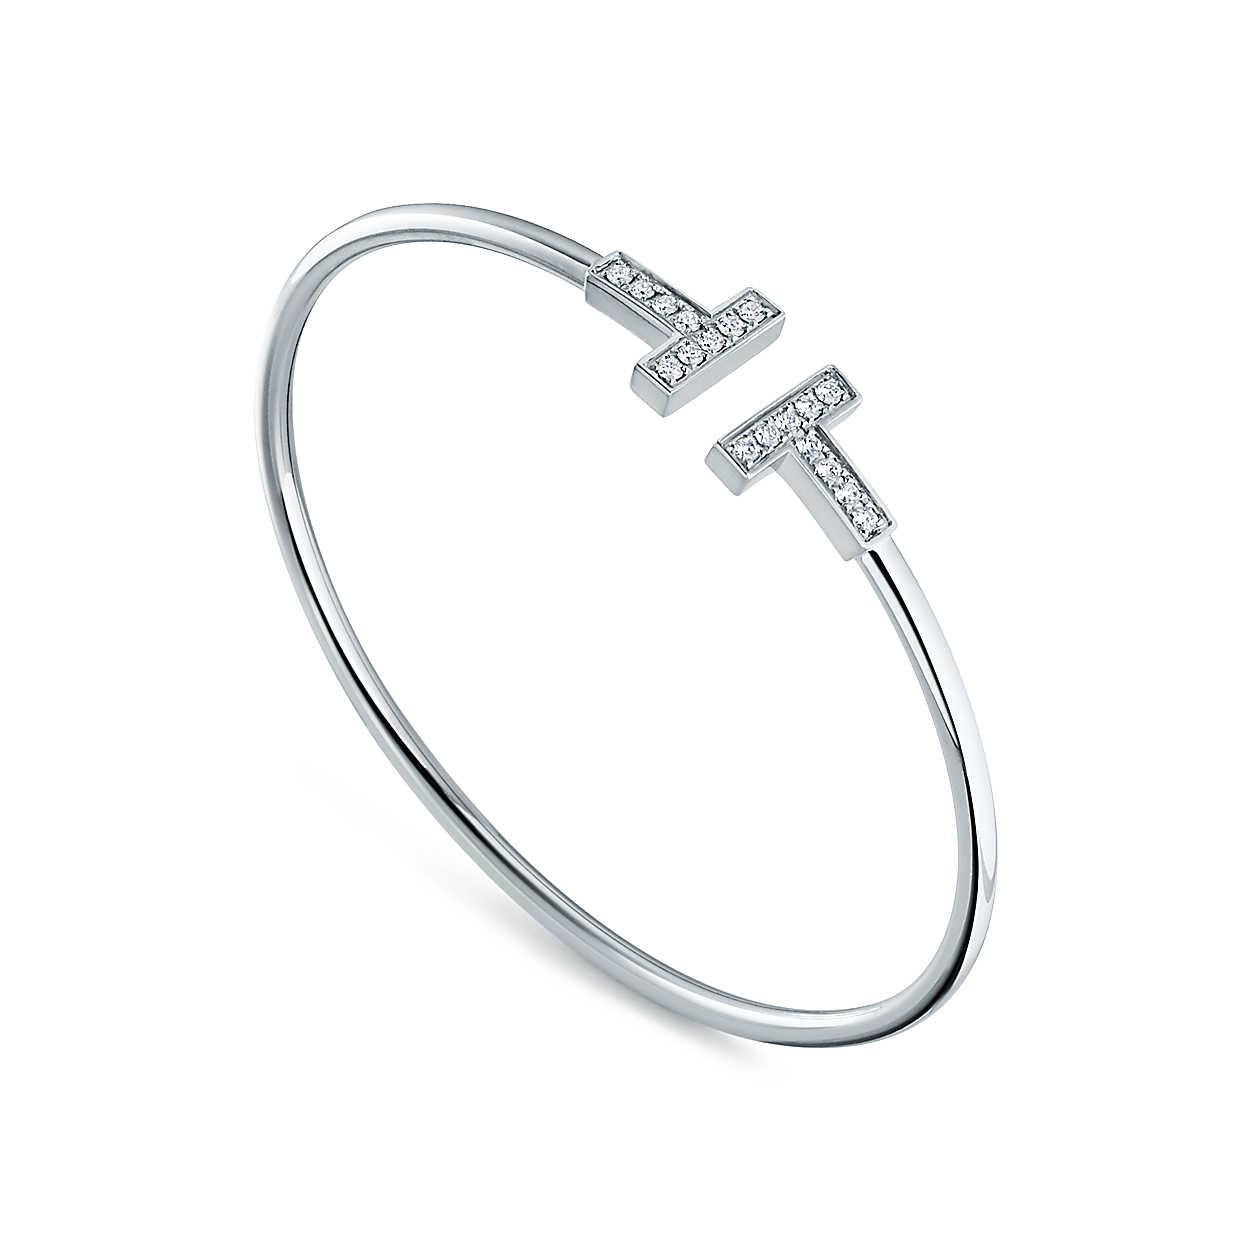 Brilliant diamonds enhance this bracelet's timeless design. As multifaceted as it is iconic, the Tiffany T collection is a tangible reminder of the connections we feel but can't always see. Pair this wire bracelet with other Tiffany T designs for a